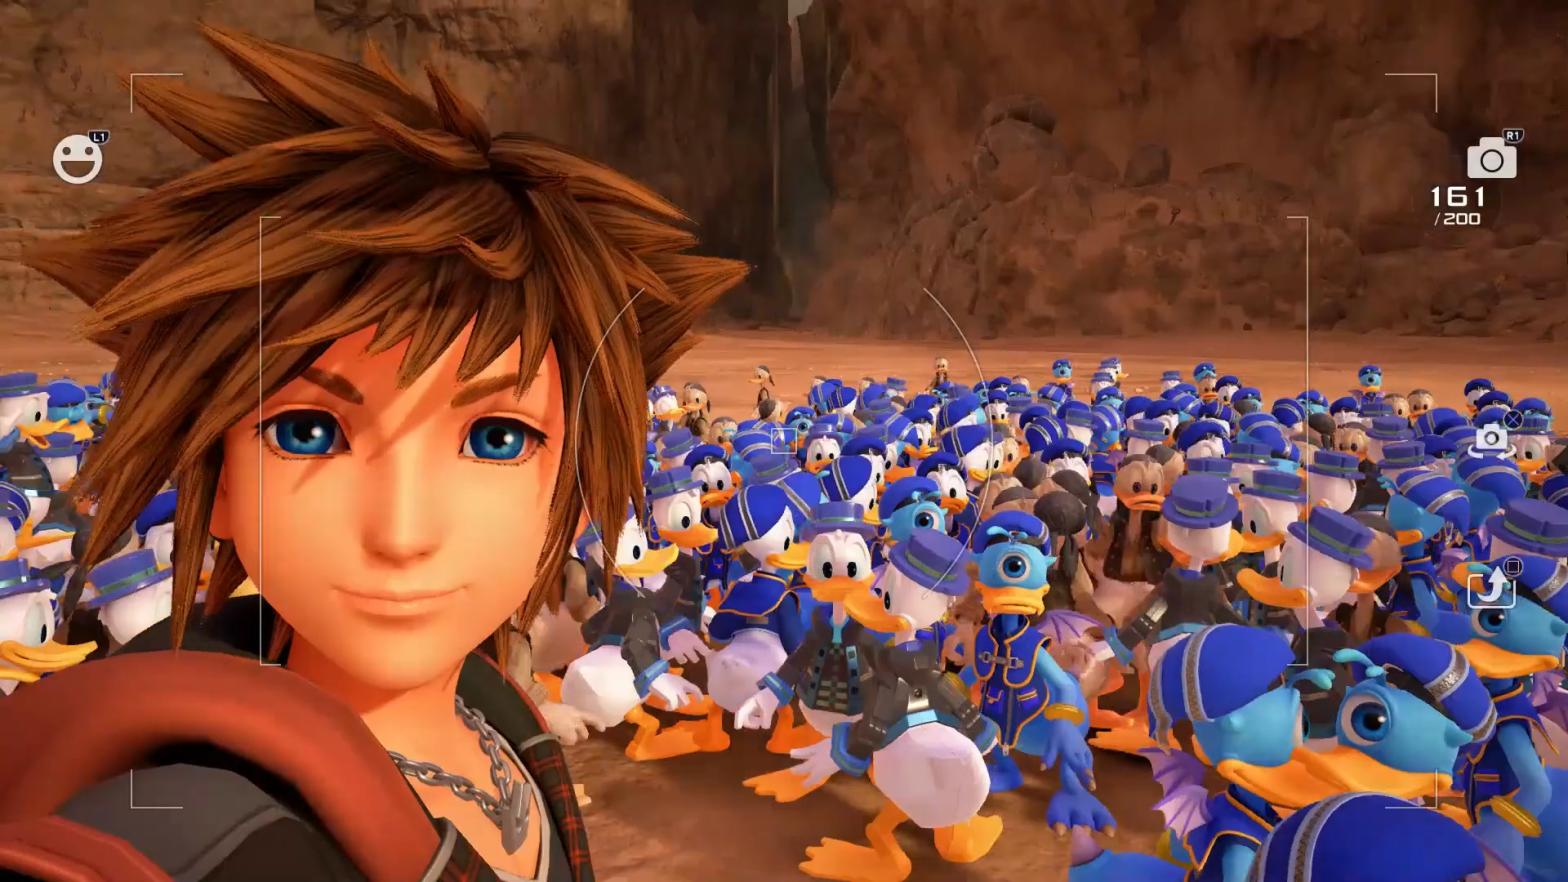 Back at it again in the Donald Duck hellscape. (Screenshot: Square Enix / BobJerry)